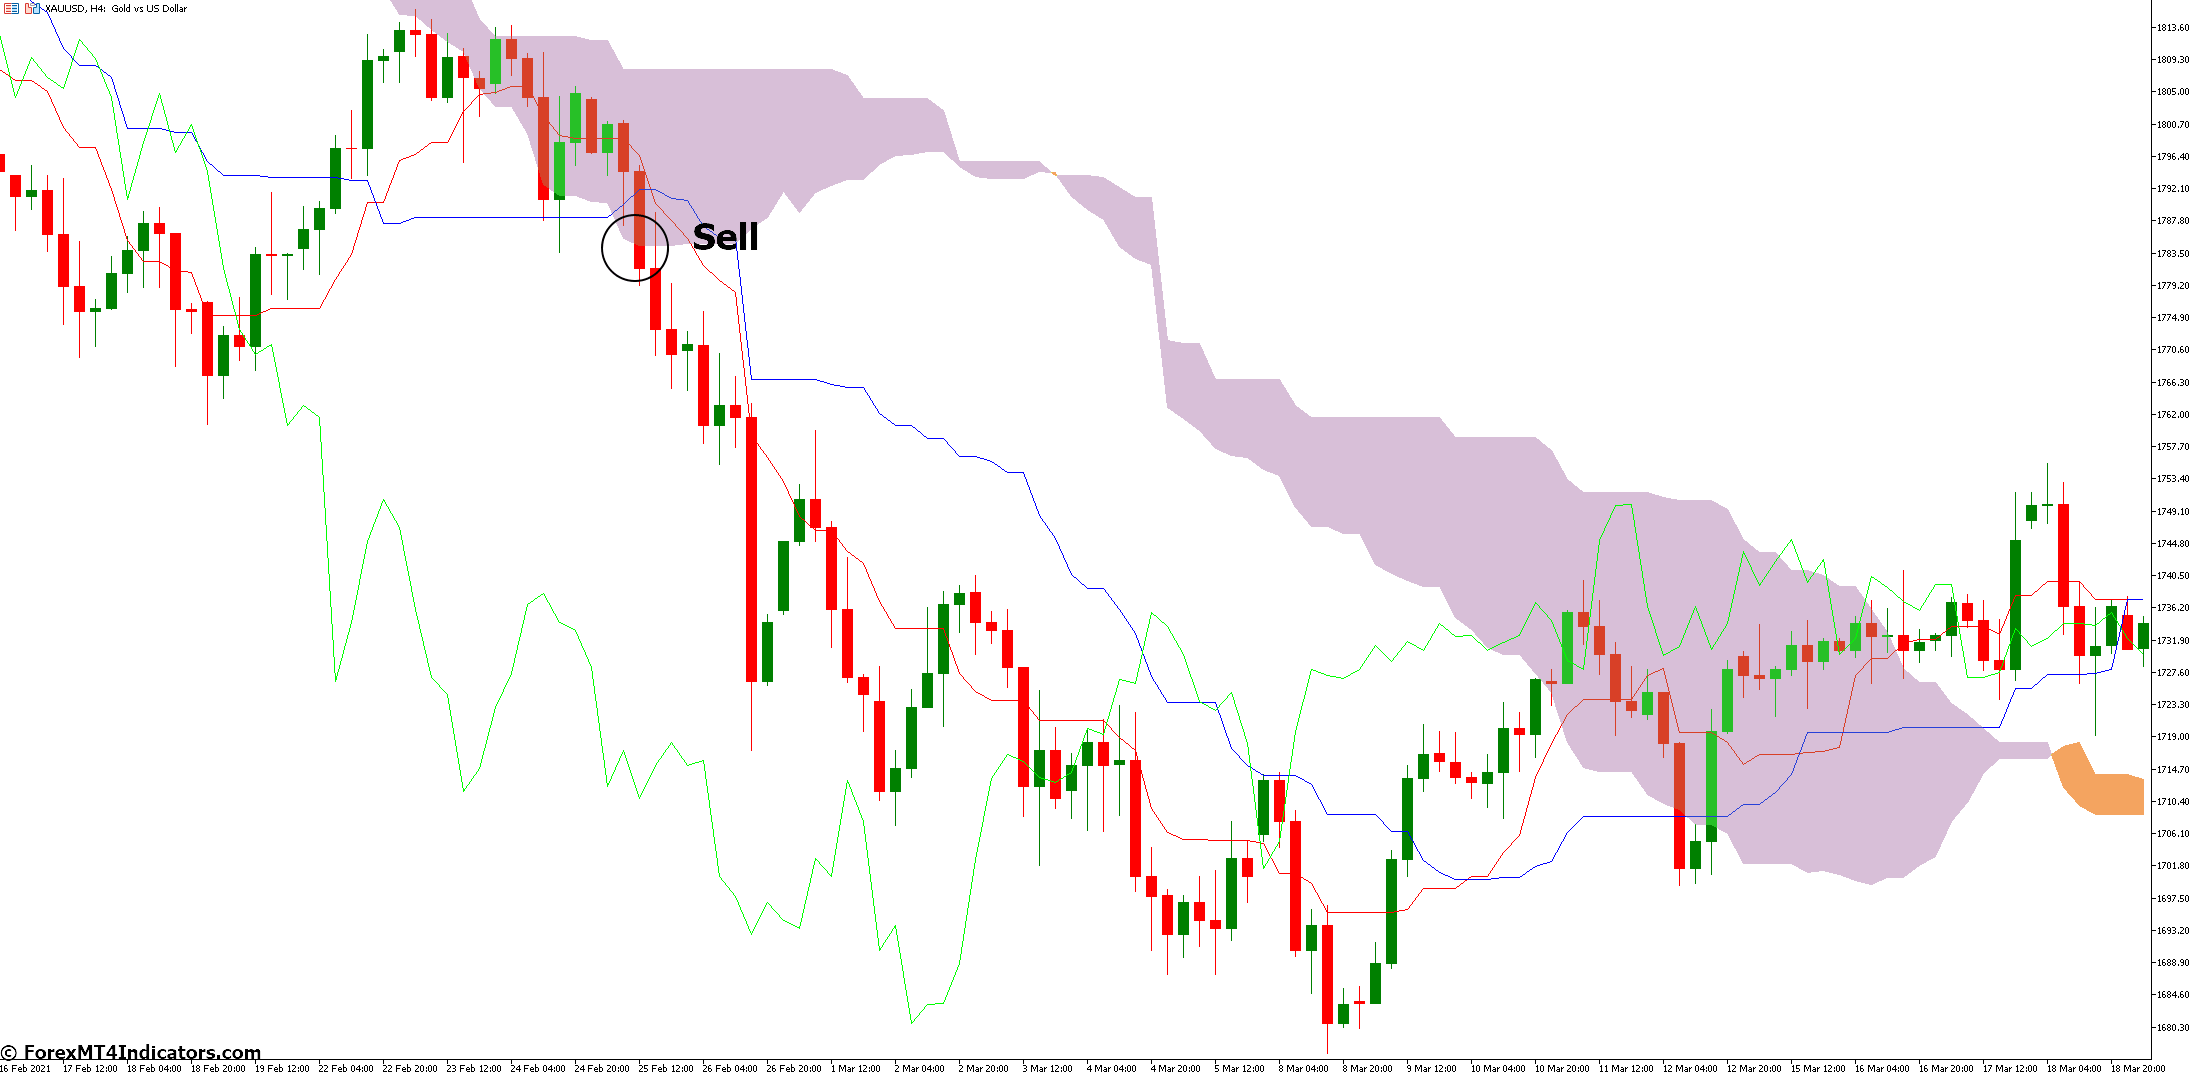 How to Trade with Ichimoku Indicator - Sell Entry